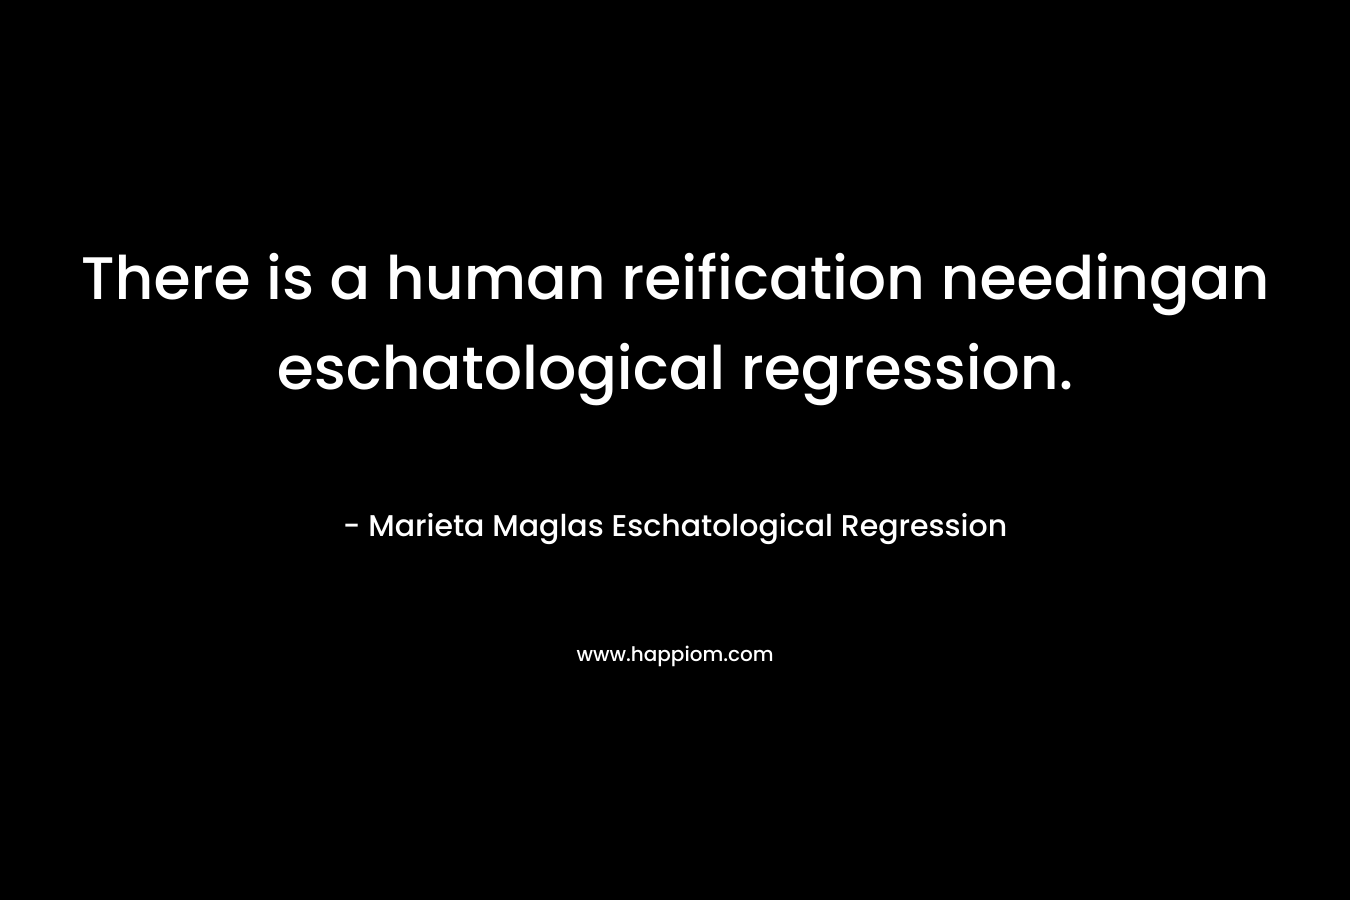 There is a human reification needingan eschatological regression.